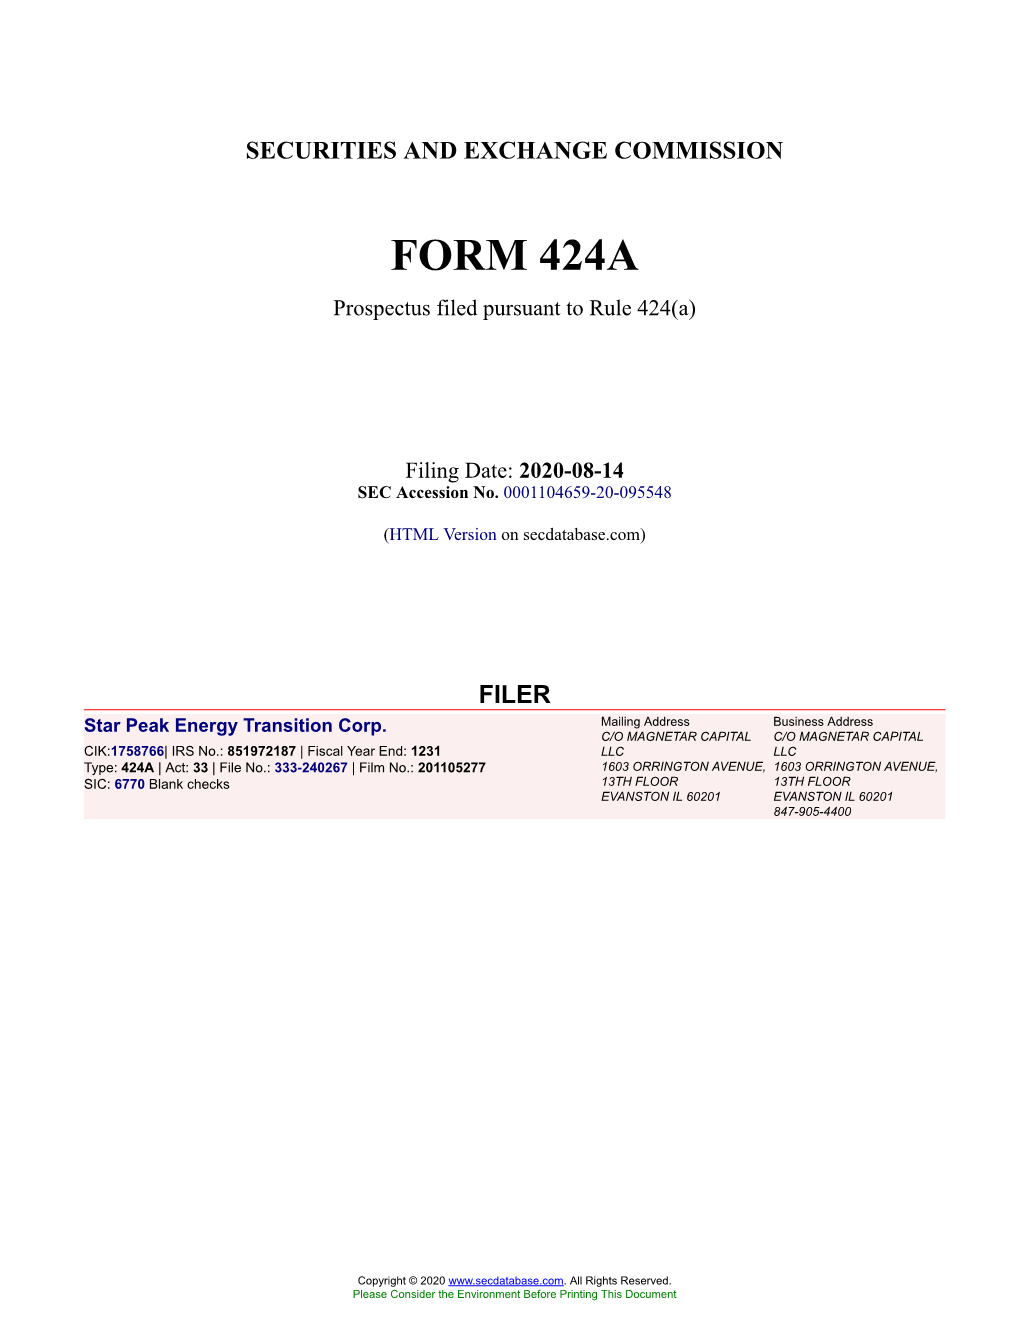 Star Peak Energy Transition Corp. Form 424A Filed 2020-08-14